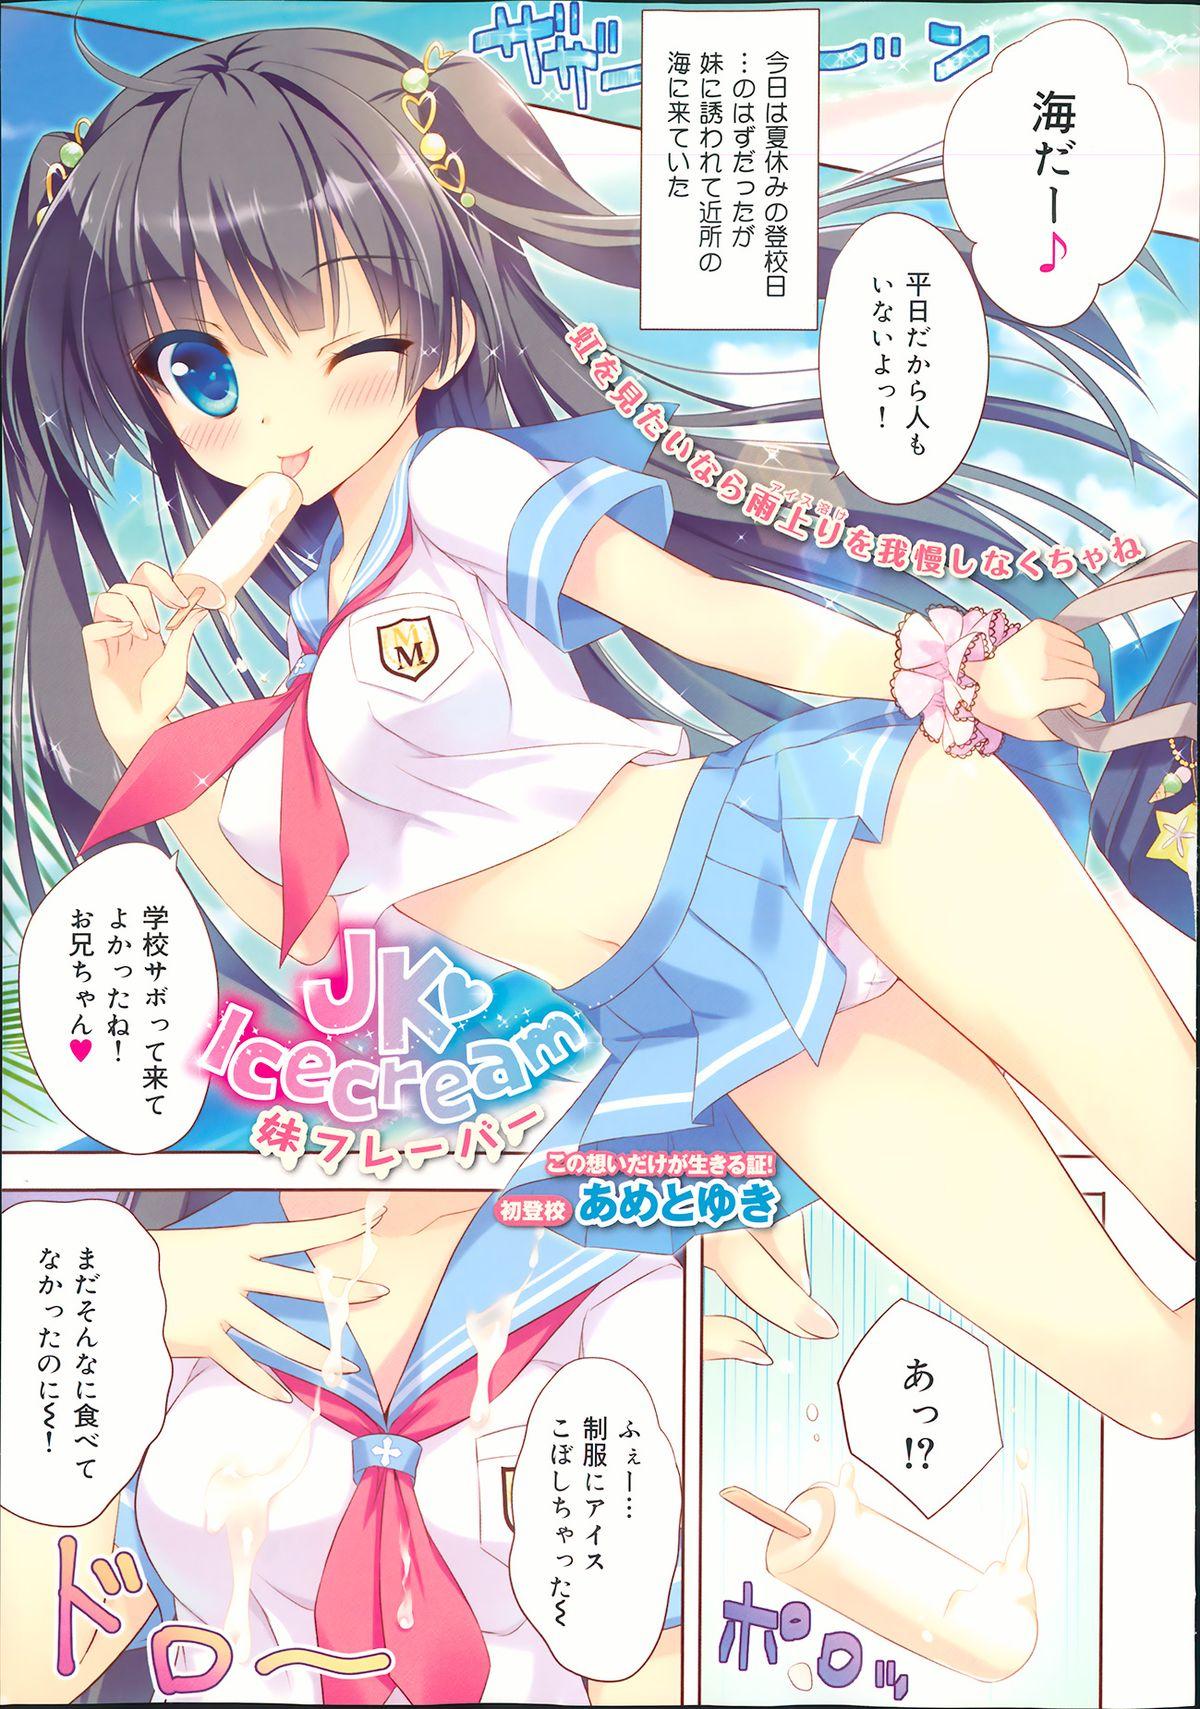 Hot Teen COMIC Maihime Musou Act. 07 2013-09 Moaning - Page 5